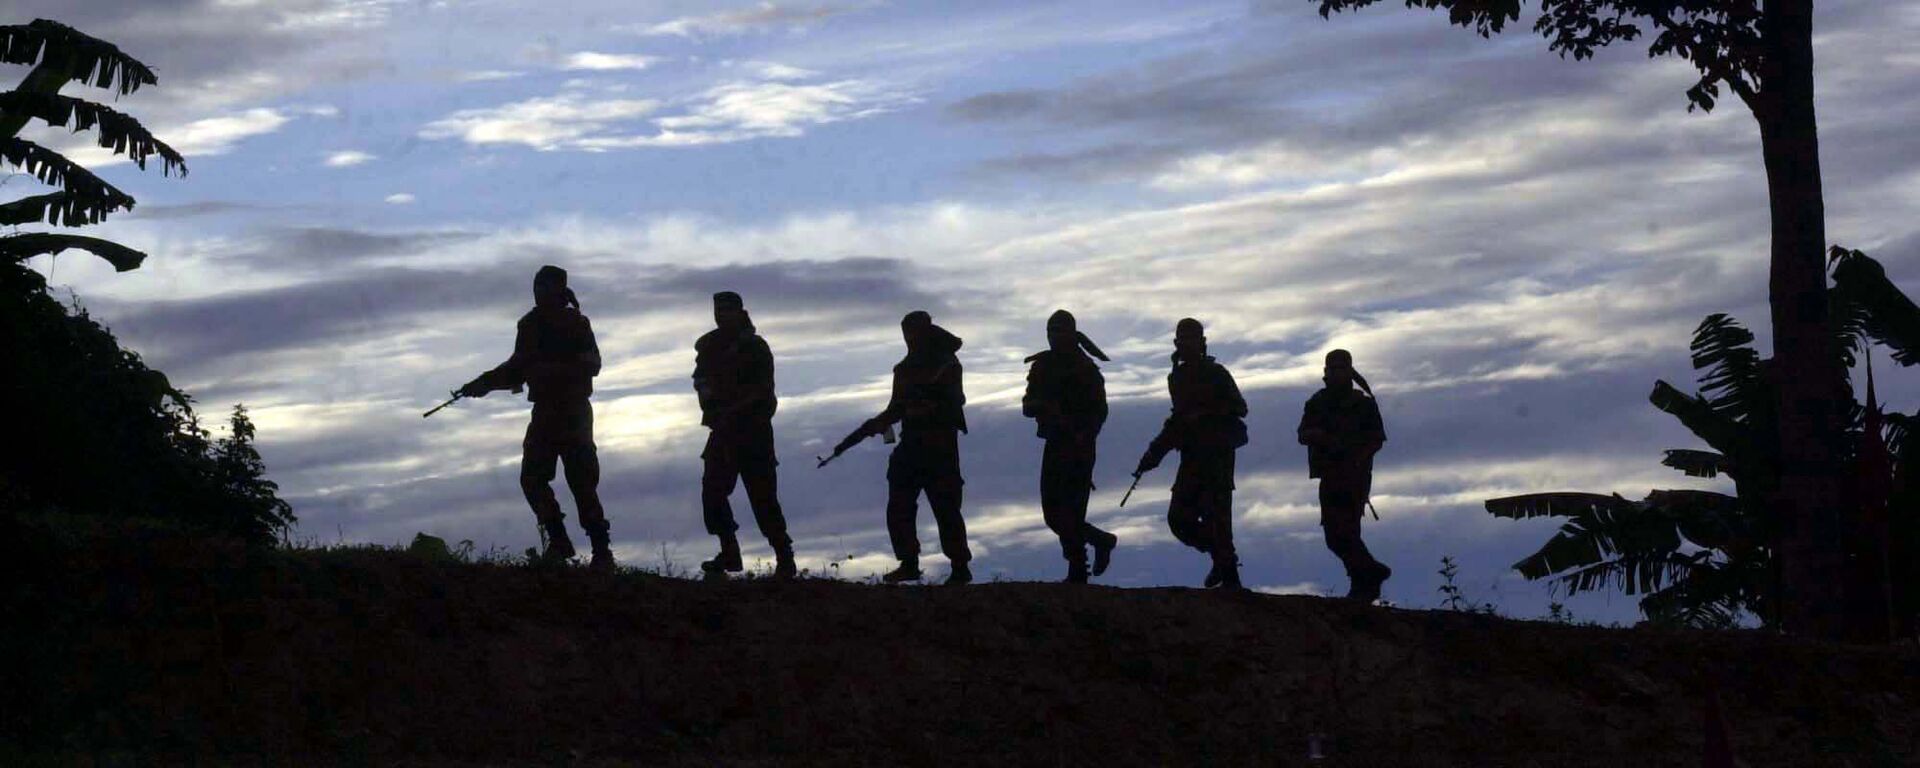 Indian army commandos patrol on a ridge during a jungle survival training session at the Counter Insurgency and Jungle Warfare School (CIJWS) in Vairengte, 38 miles north of Aizawal, capital of the northeastern India state of Mizoram, Saturday, Sept. 11, 2004 - Sputnik International, 1920, 03.10.2021